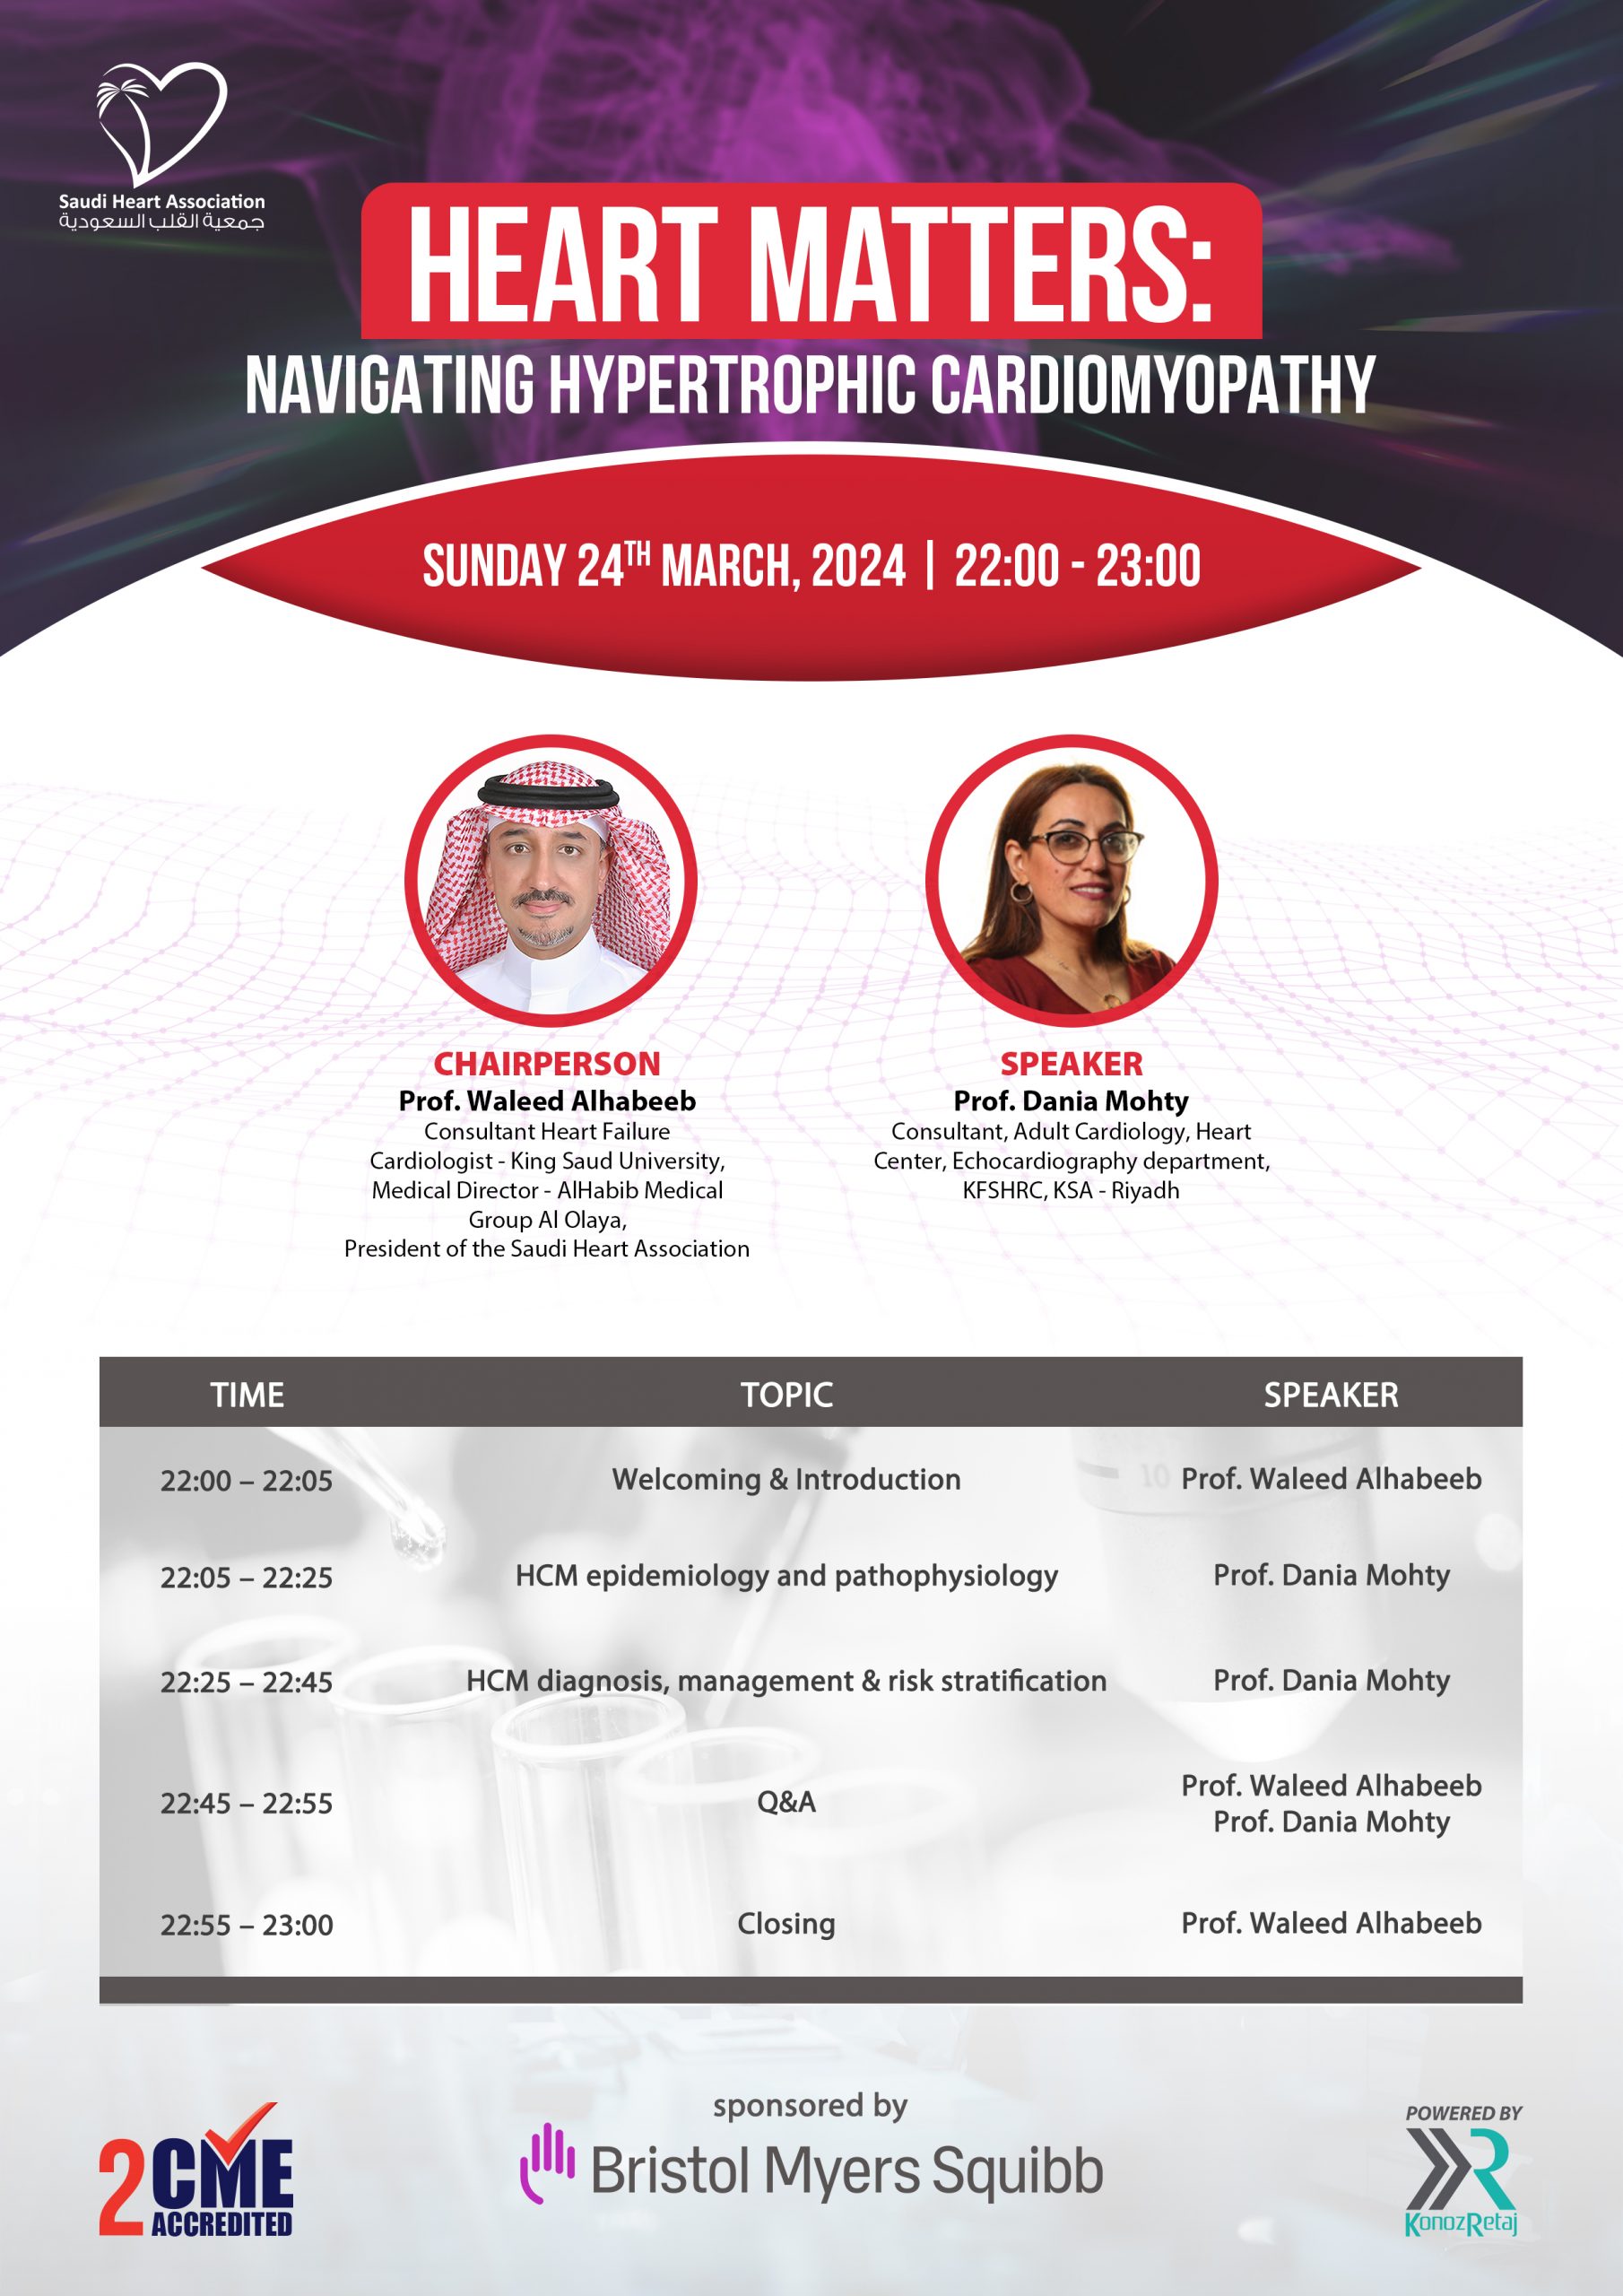 HEART MATTERS: NAVIGATING HYPERTROPHIC CARDIOMYOPATHY – March 24, 2024